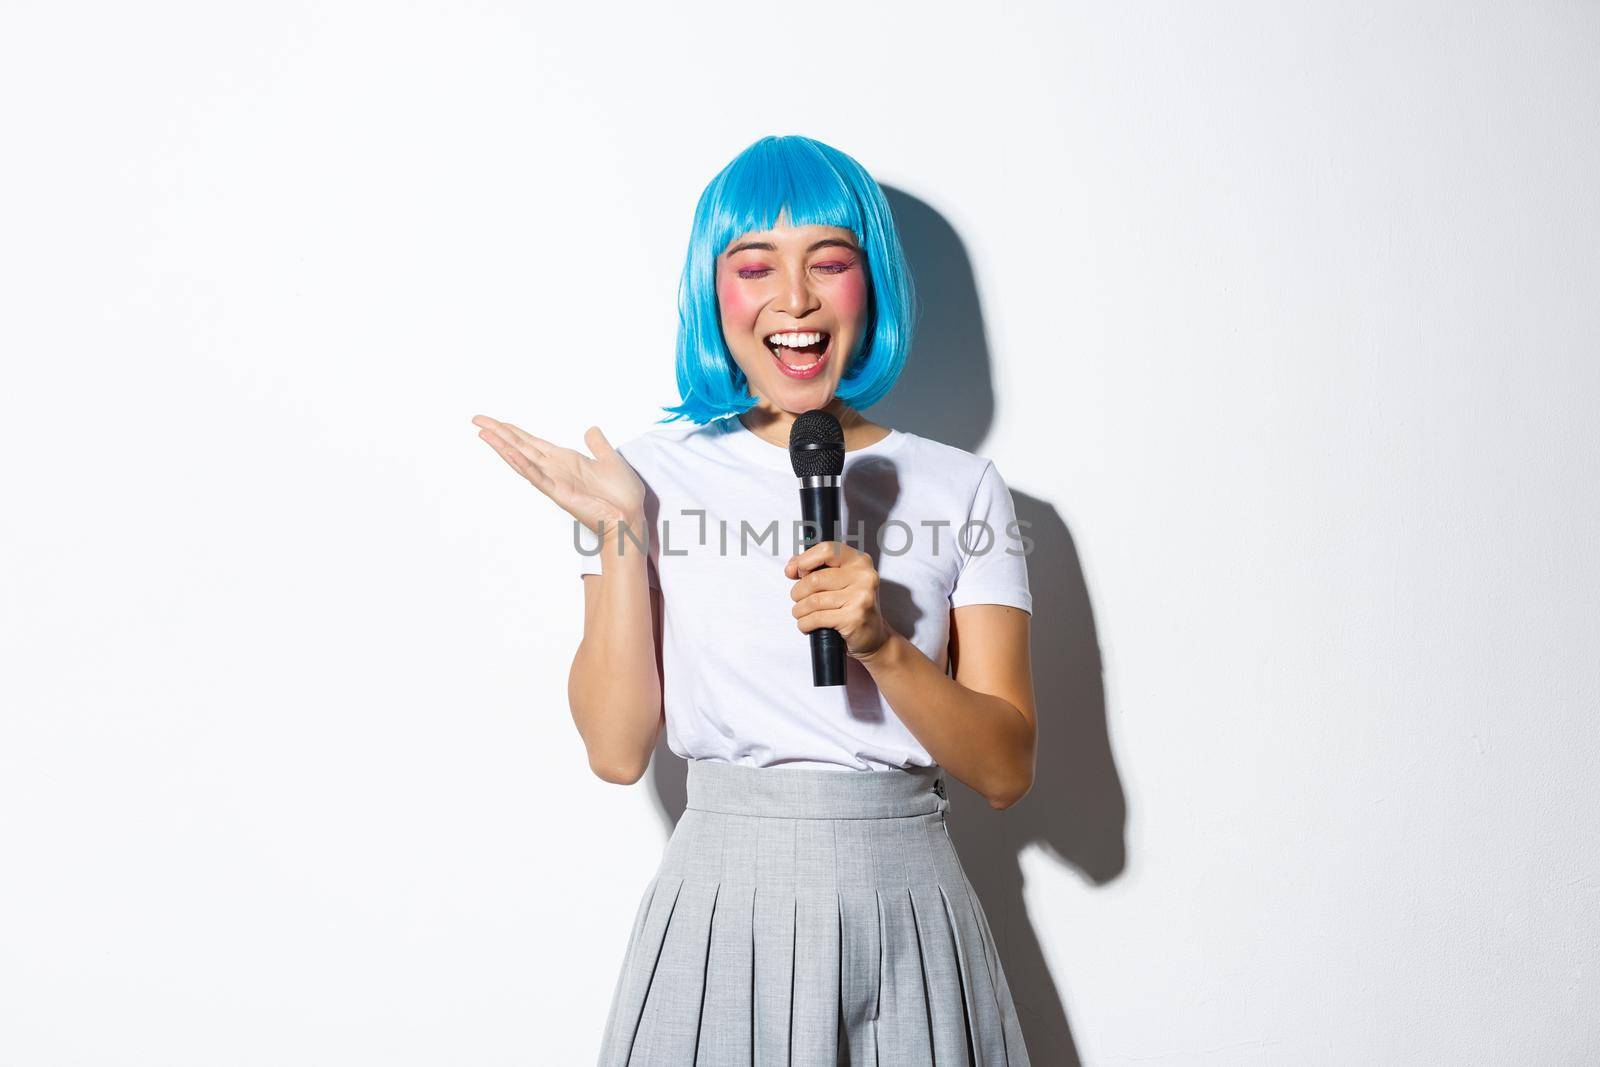 Cheerful cute asian girl dressed up as anime character for halloween party, wearing blue wig and schoolgirl costume, holding microphone and singing karaoke, standing over white background.